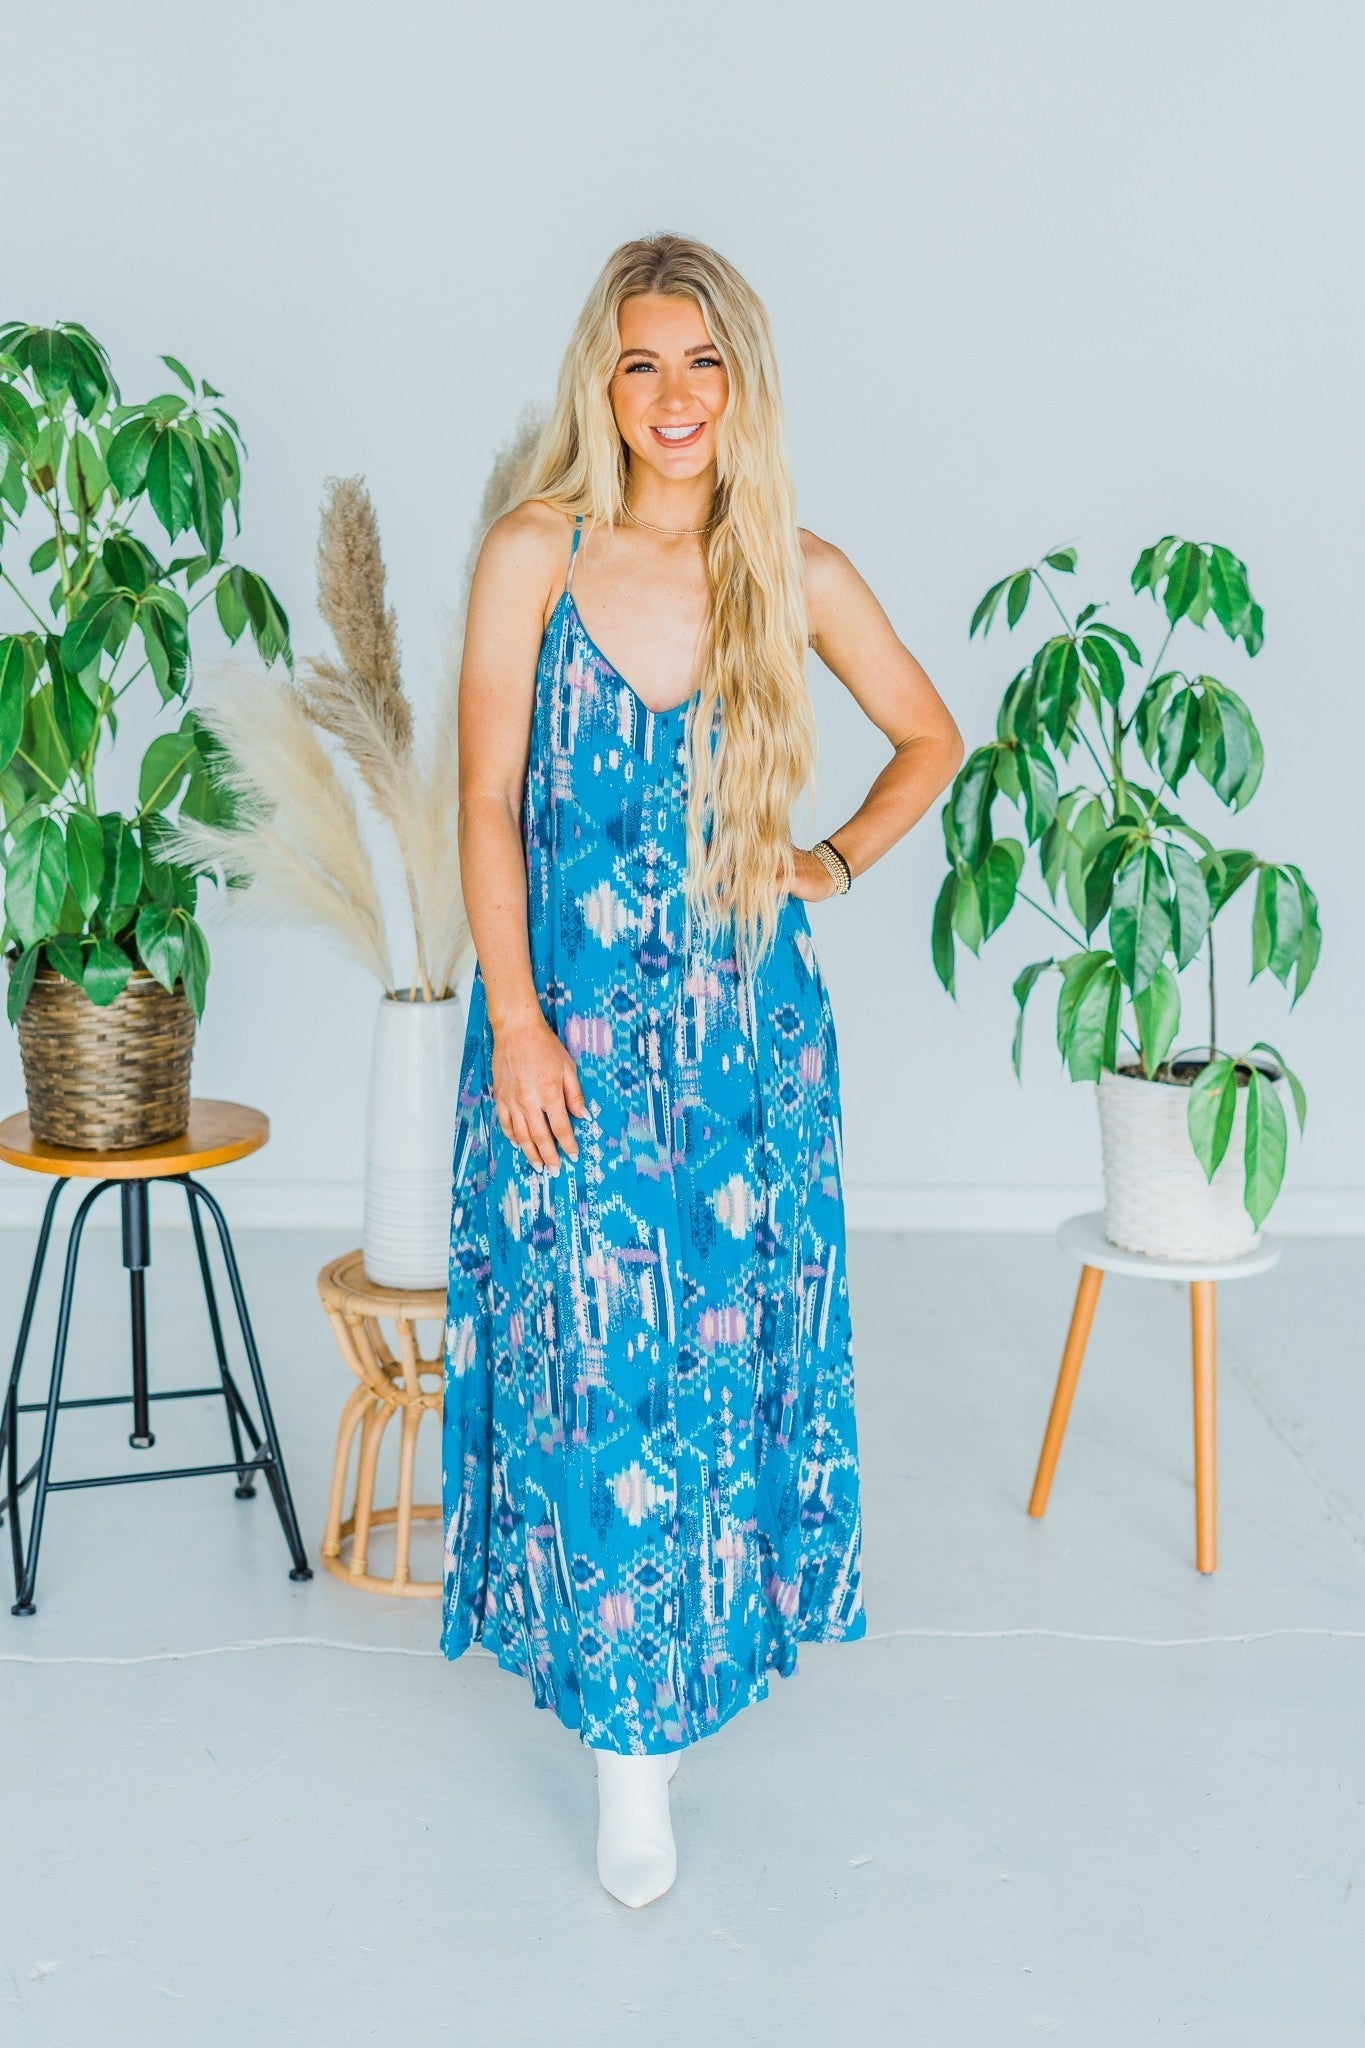 Teal Print Maxi Dress With Adjustable Straps - Whiskey Skies